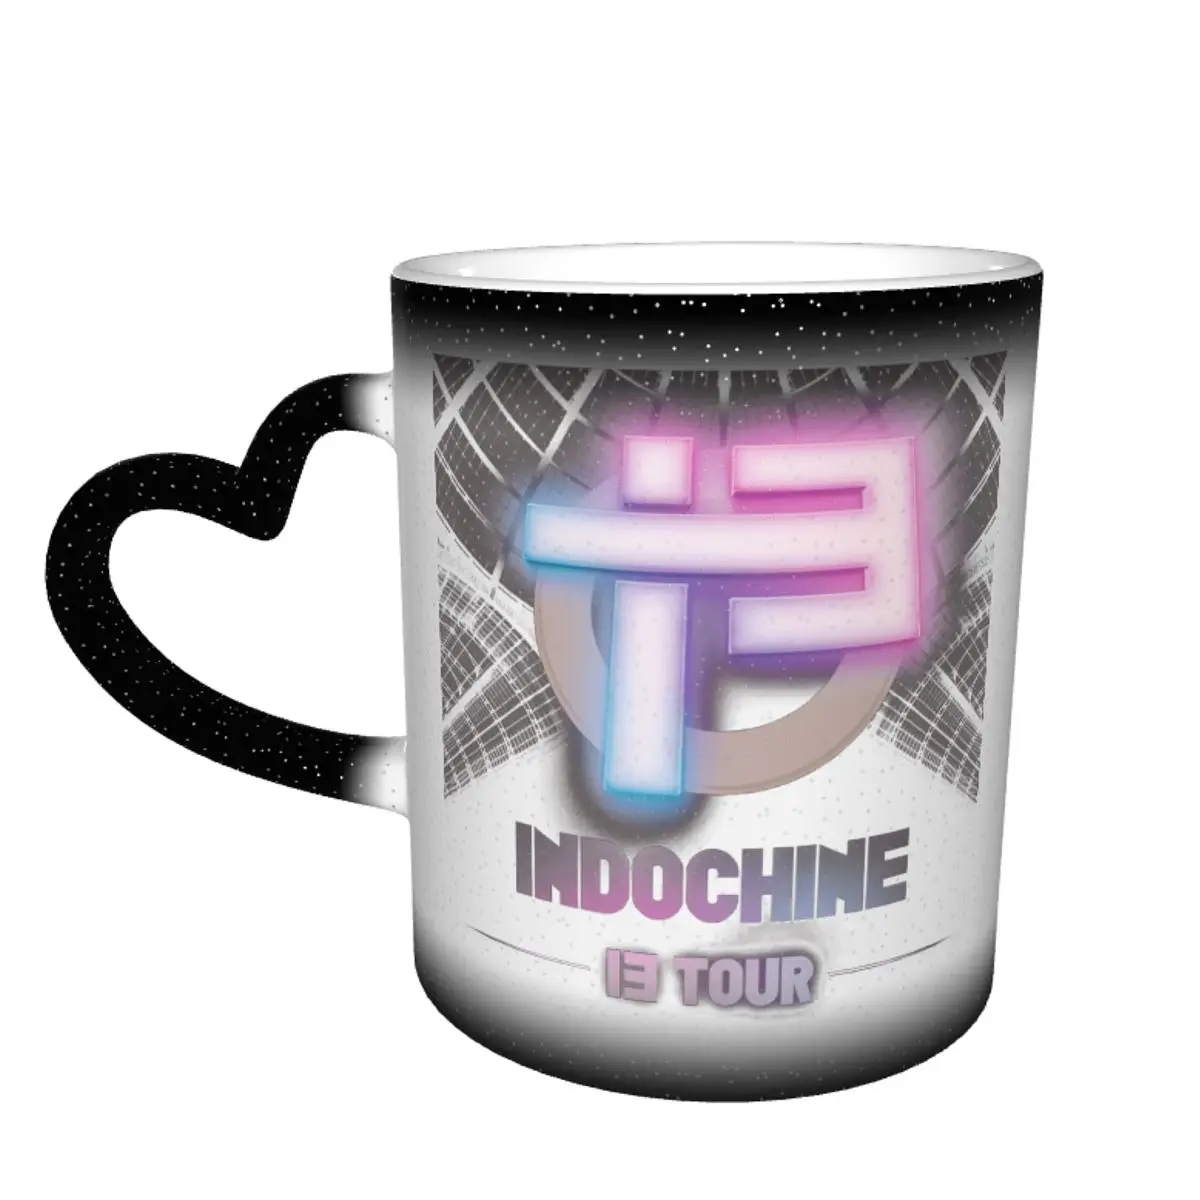 

Indo Chine Most Popular Band Rock Indochine Is Color Changing Mug in the Sky Classic Ceramic Heat-sensitive Cup Nerdy Tea cups